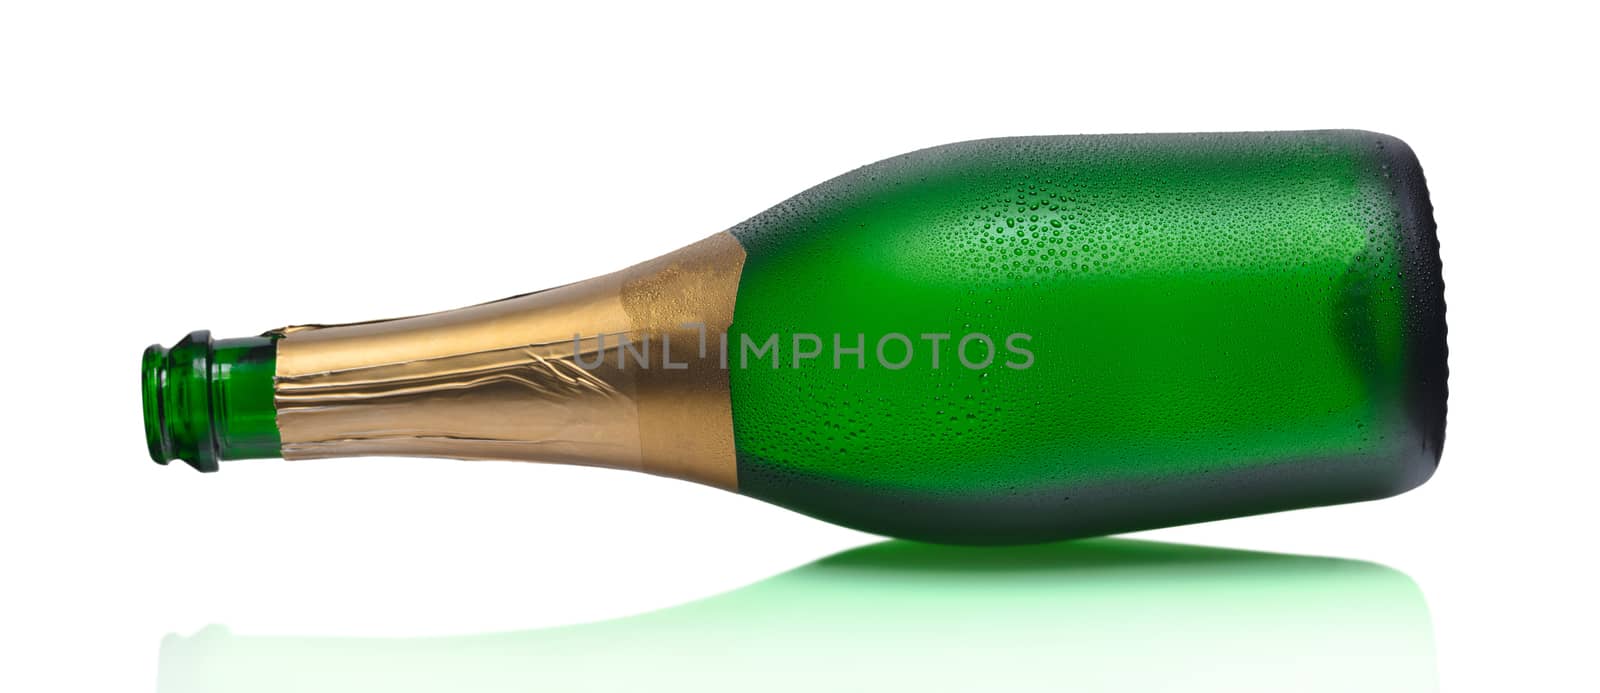 open bottle of champagne on a white background